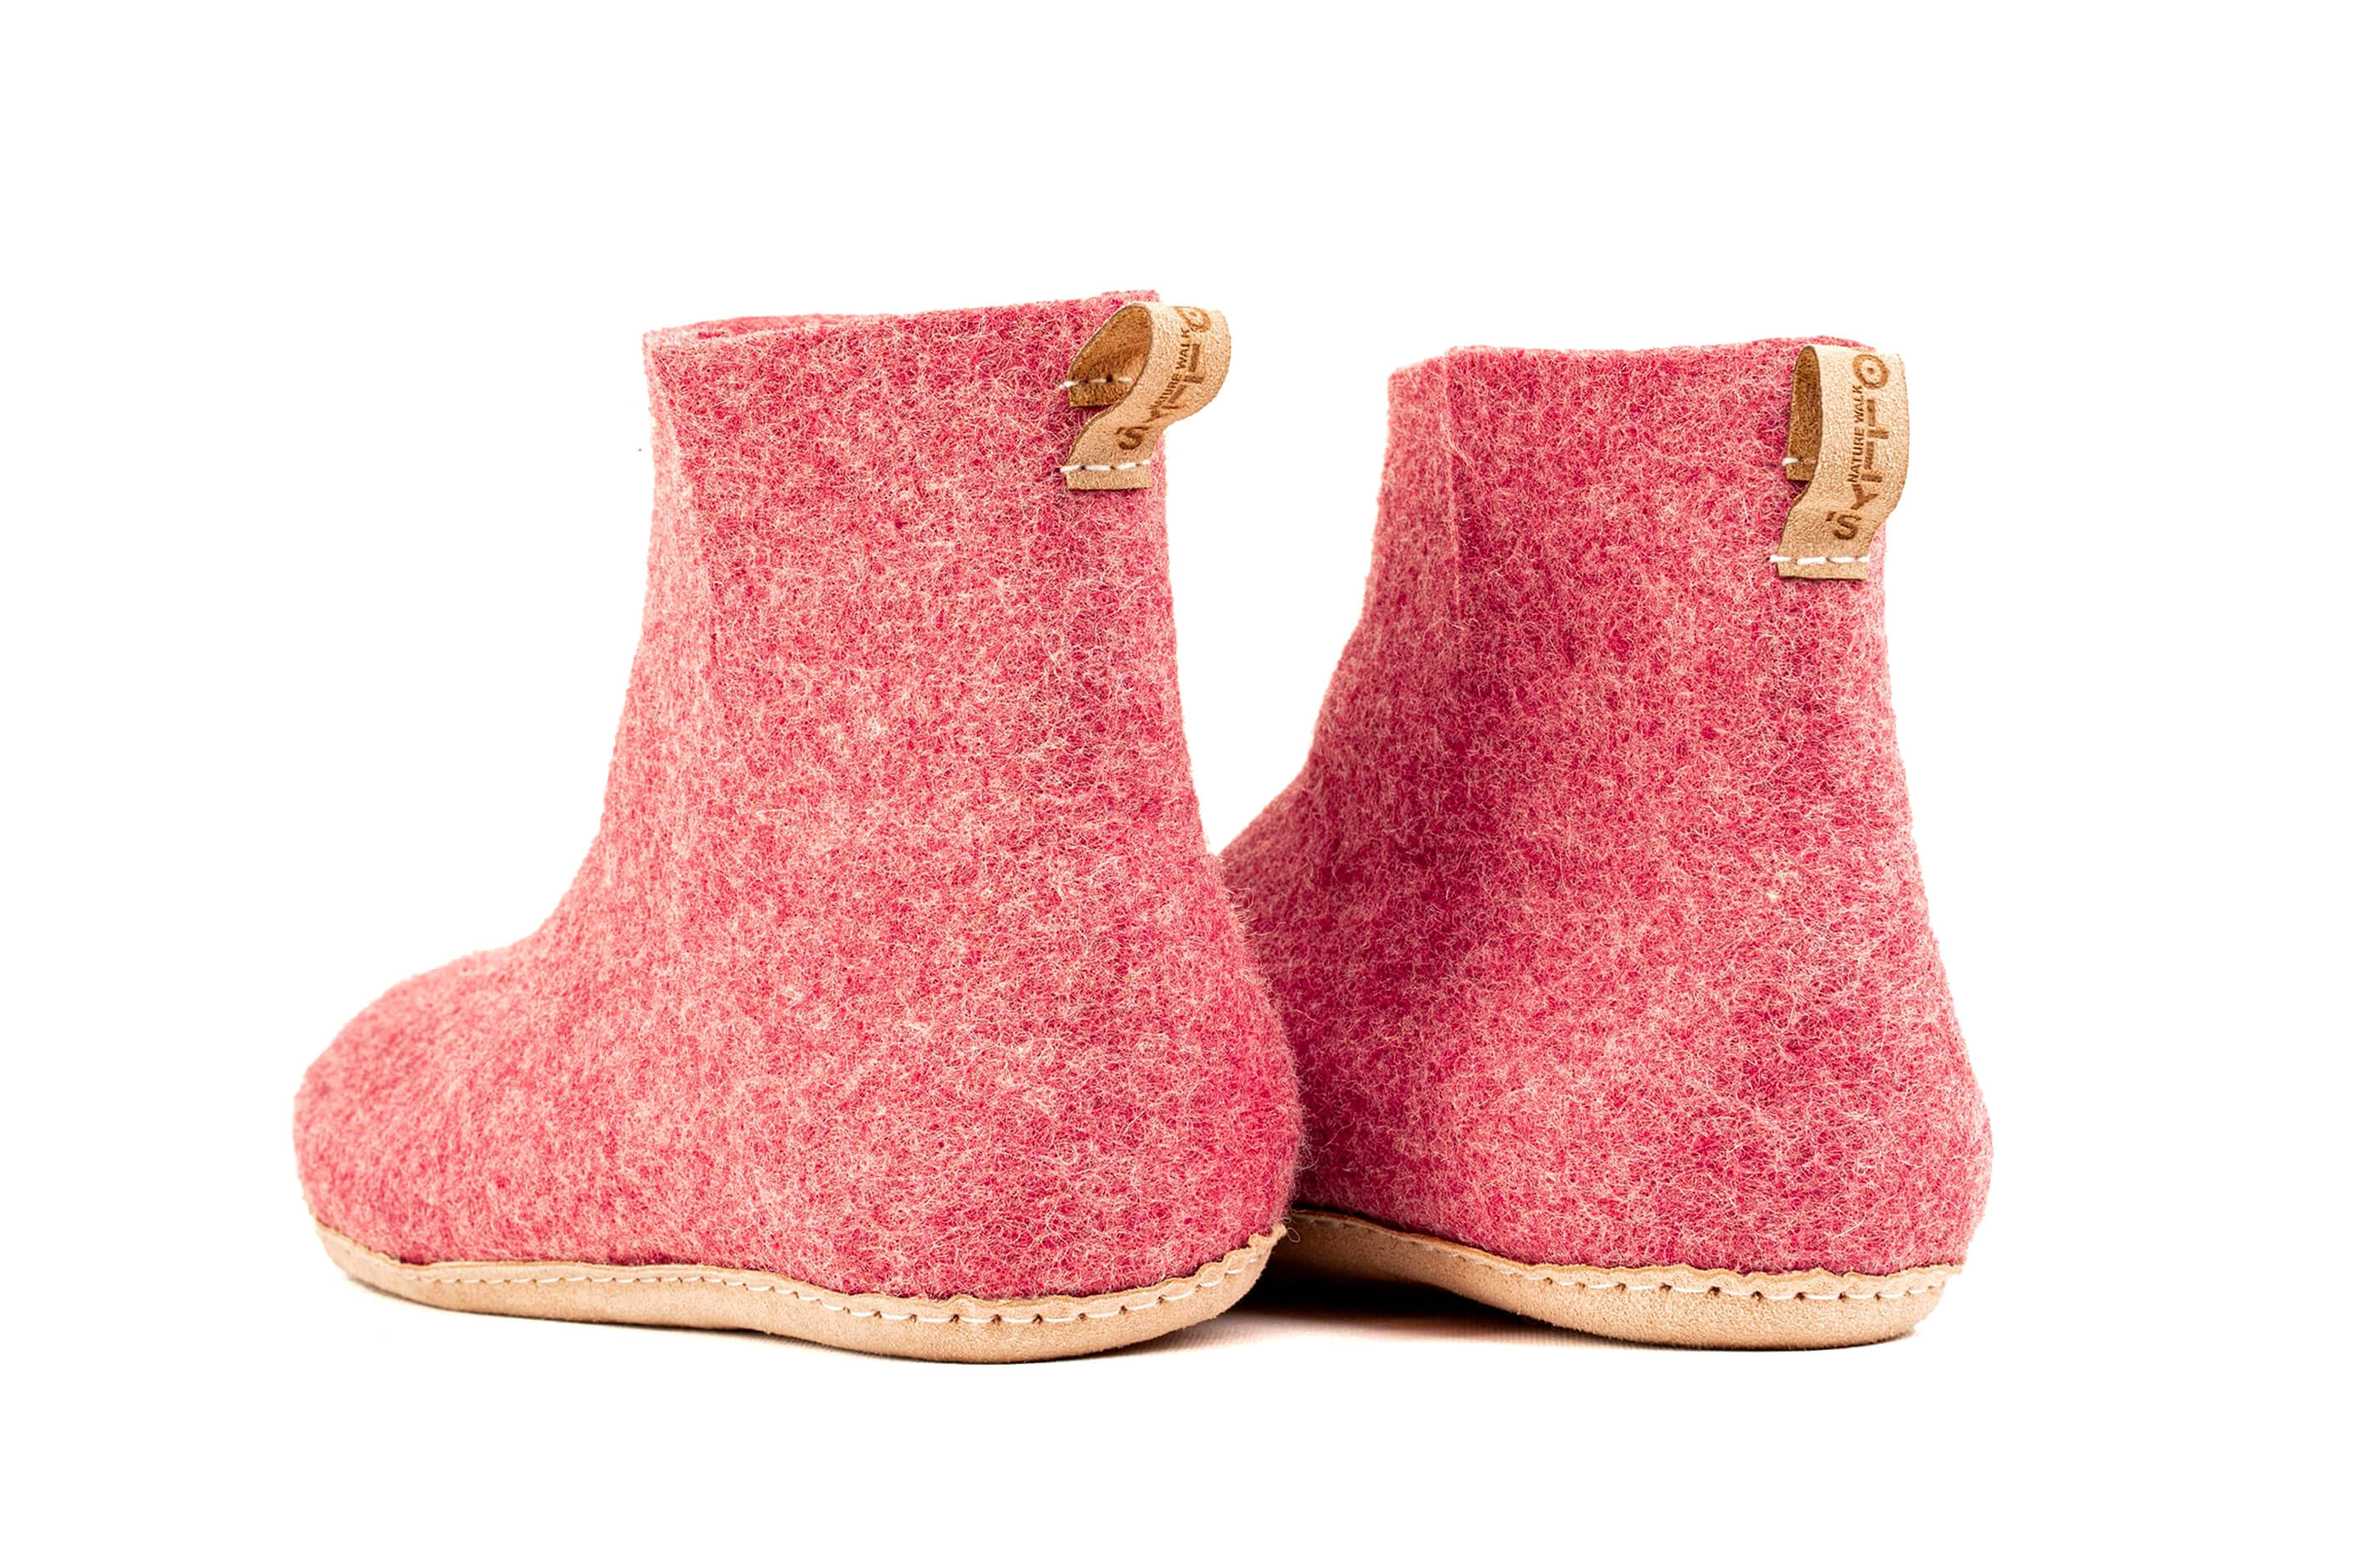 Indoor Boots With Leather Sole - Cherry Pink